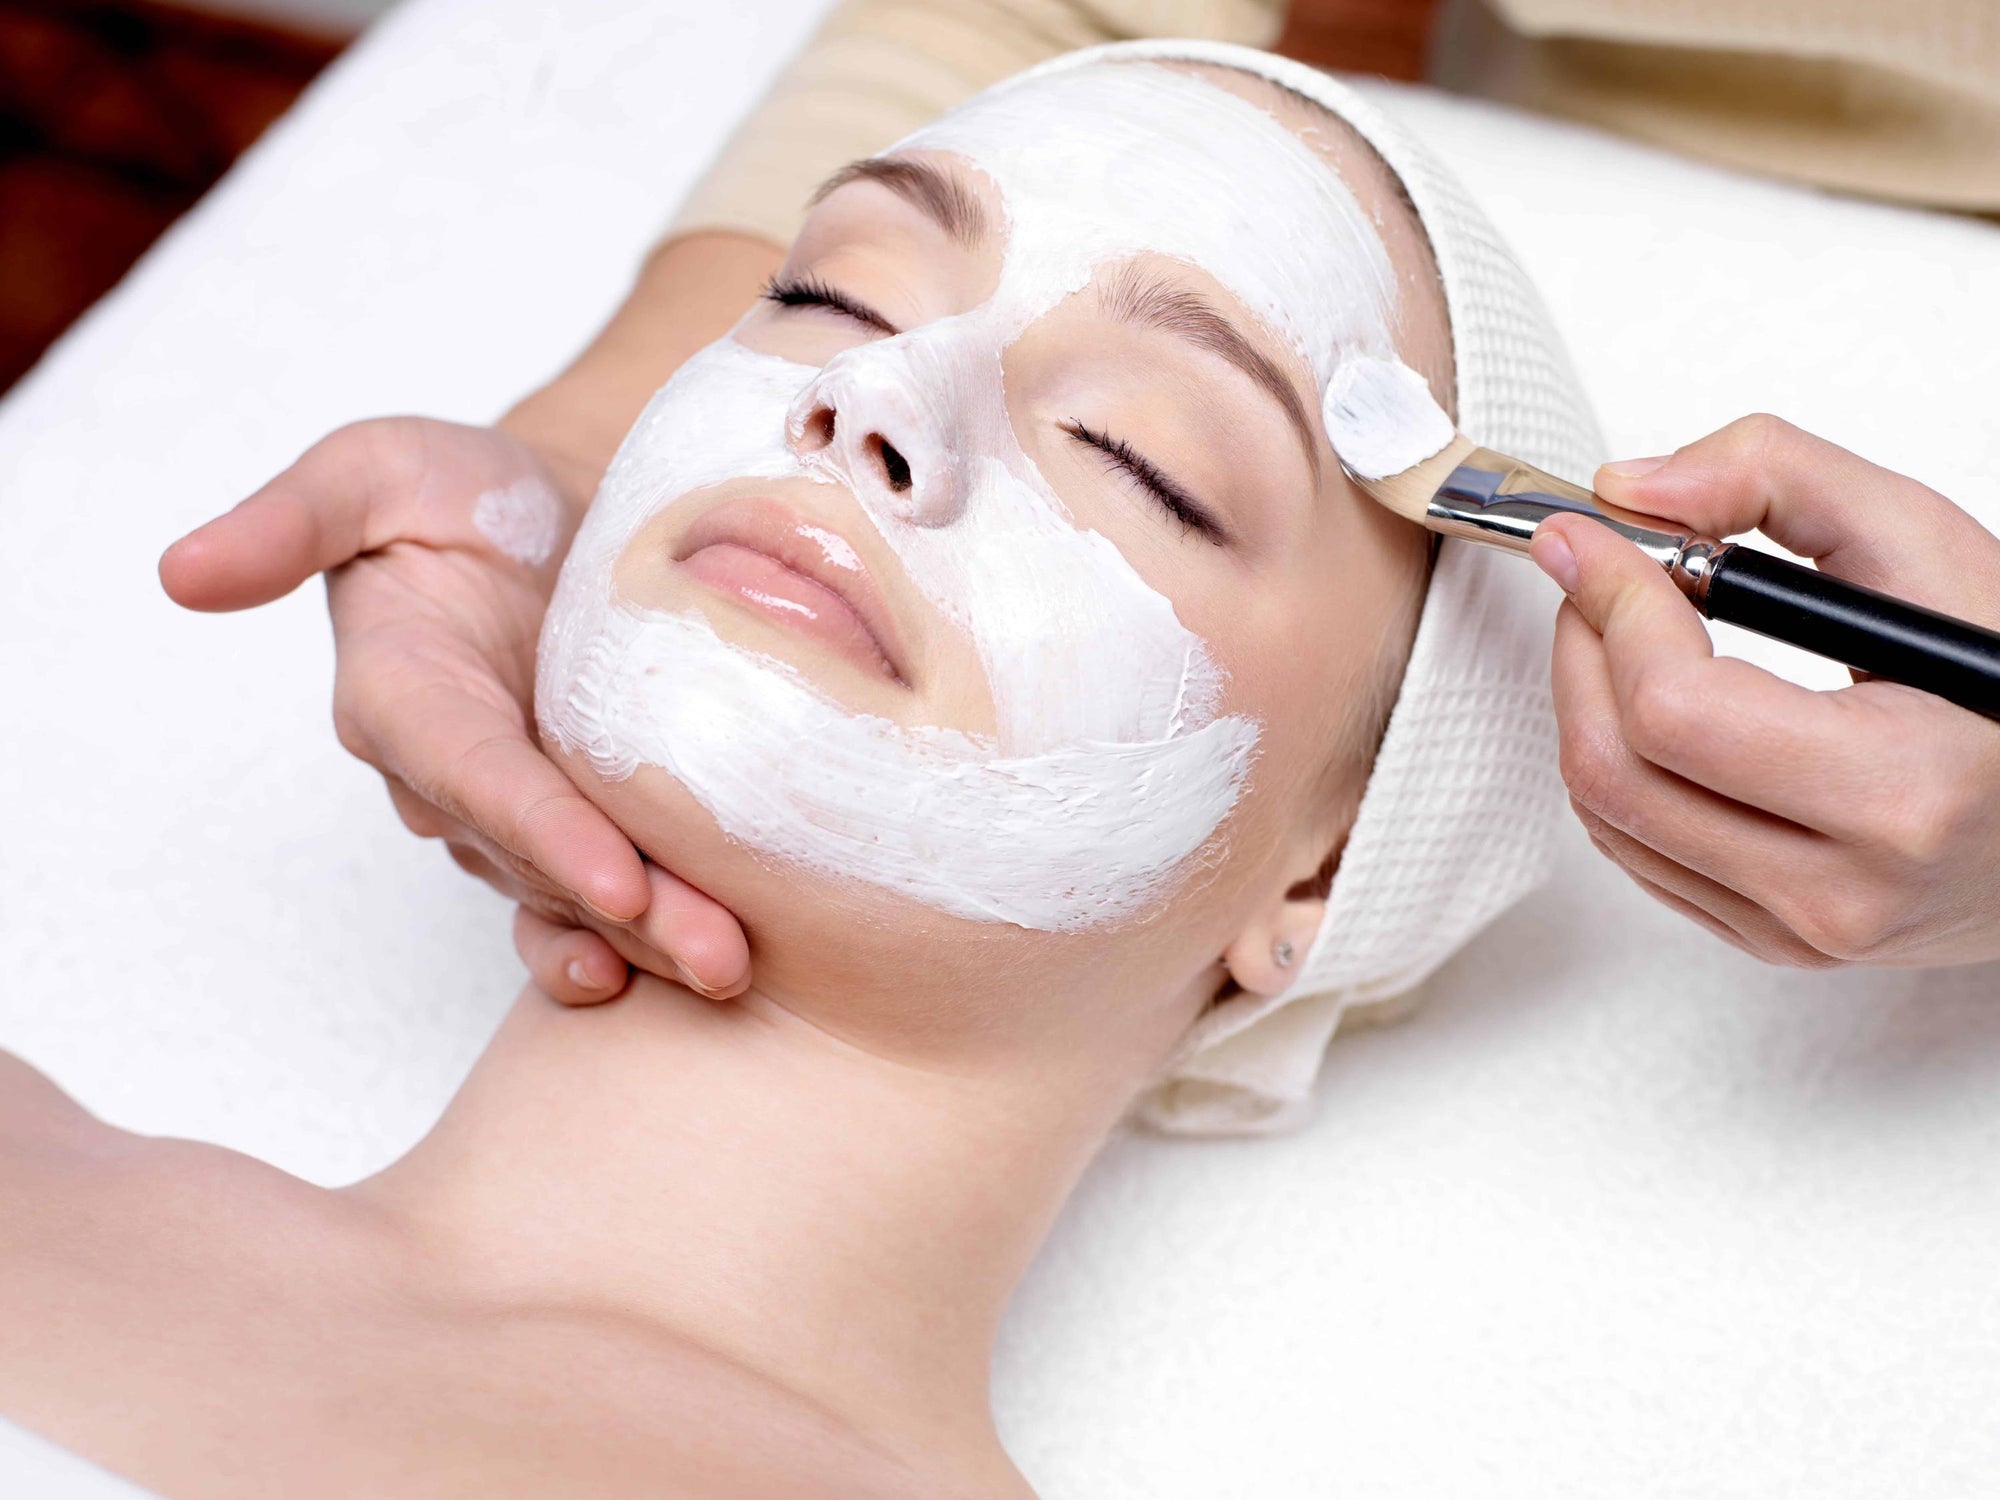 Revitalise your skin at Glo Laser & Beauty